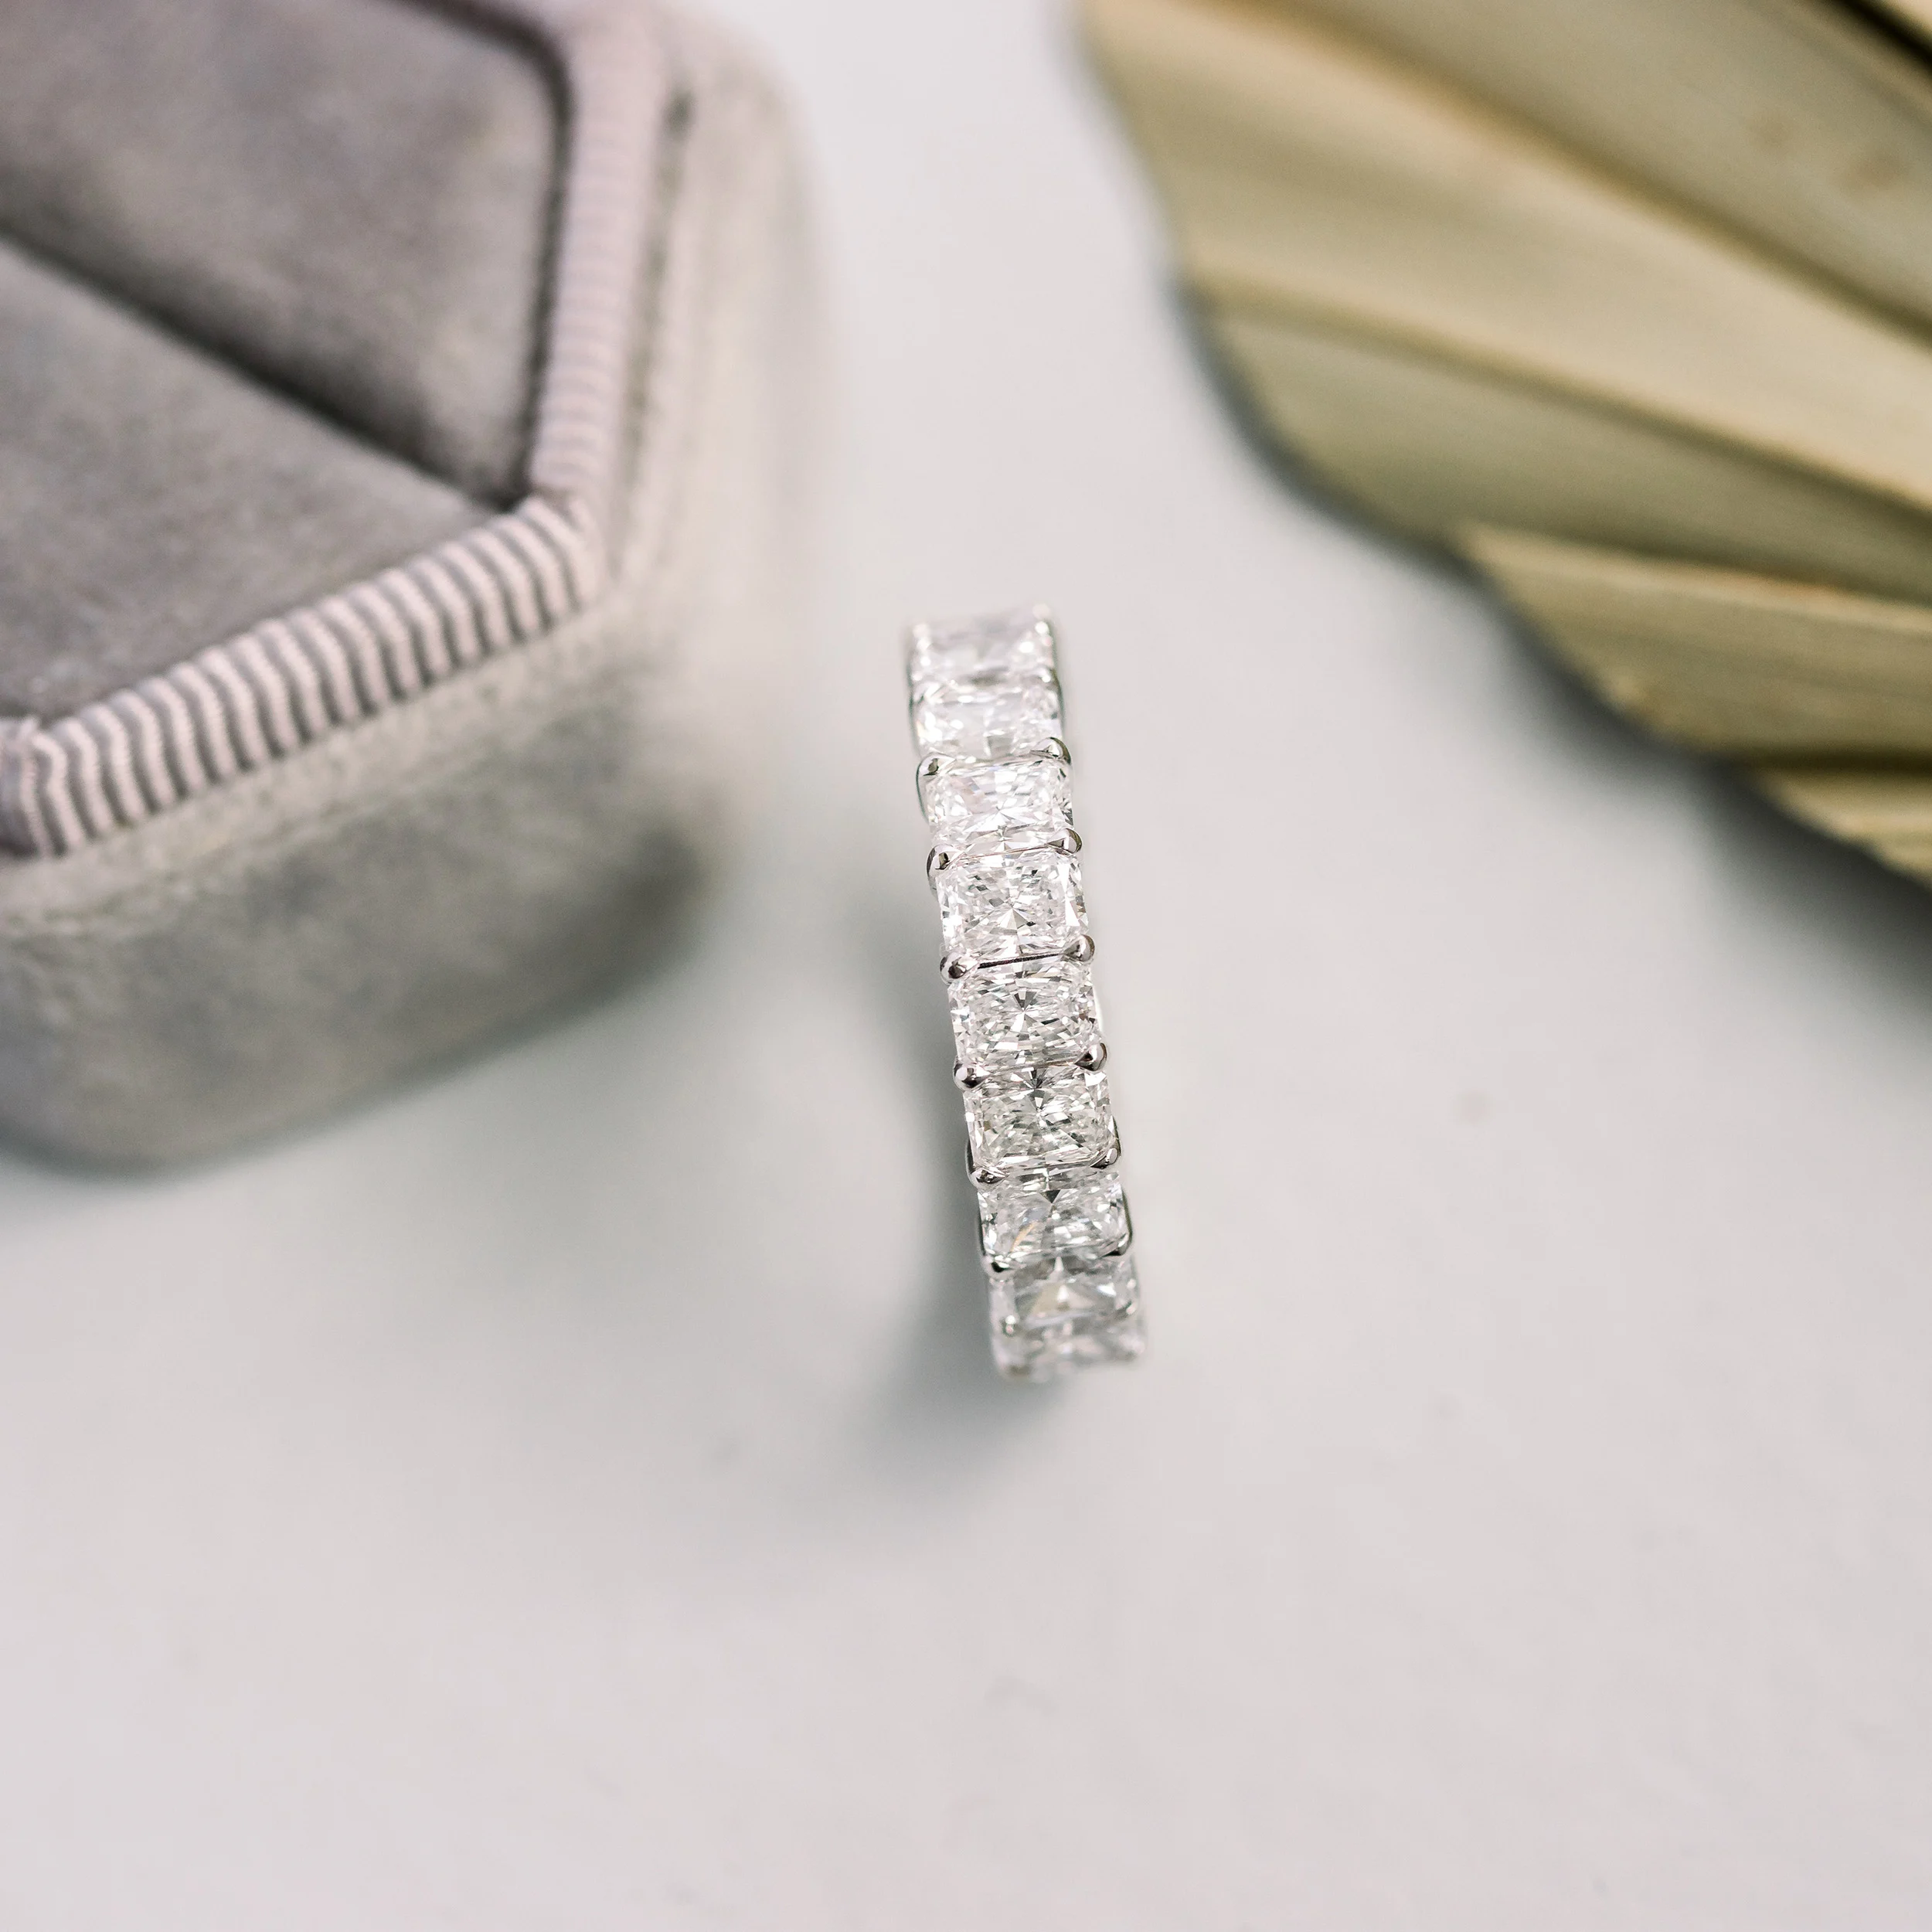 Exceptional Quality 4.4 Carat Diamonds set in Platinum Radiant Eternity Band (Main View)